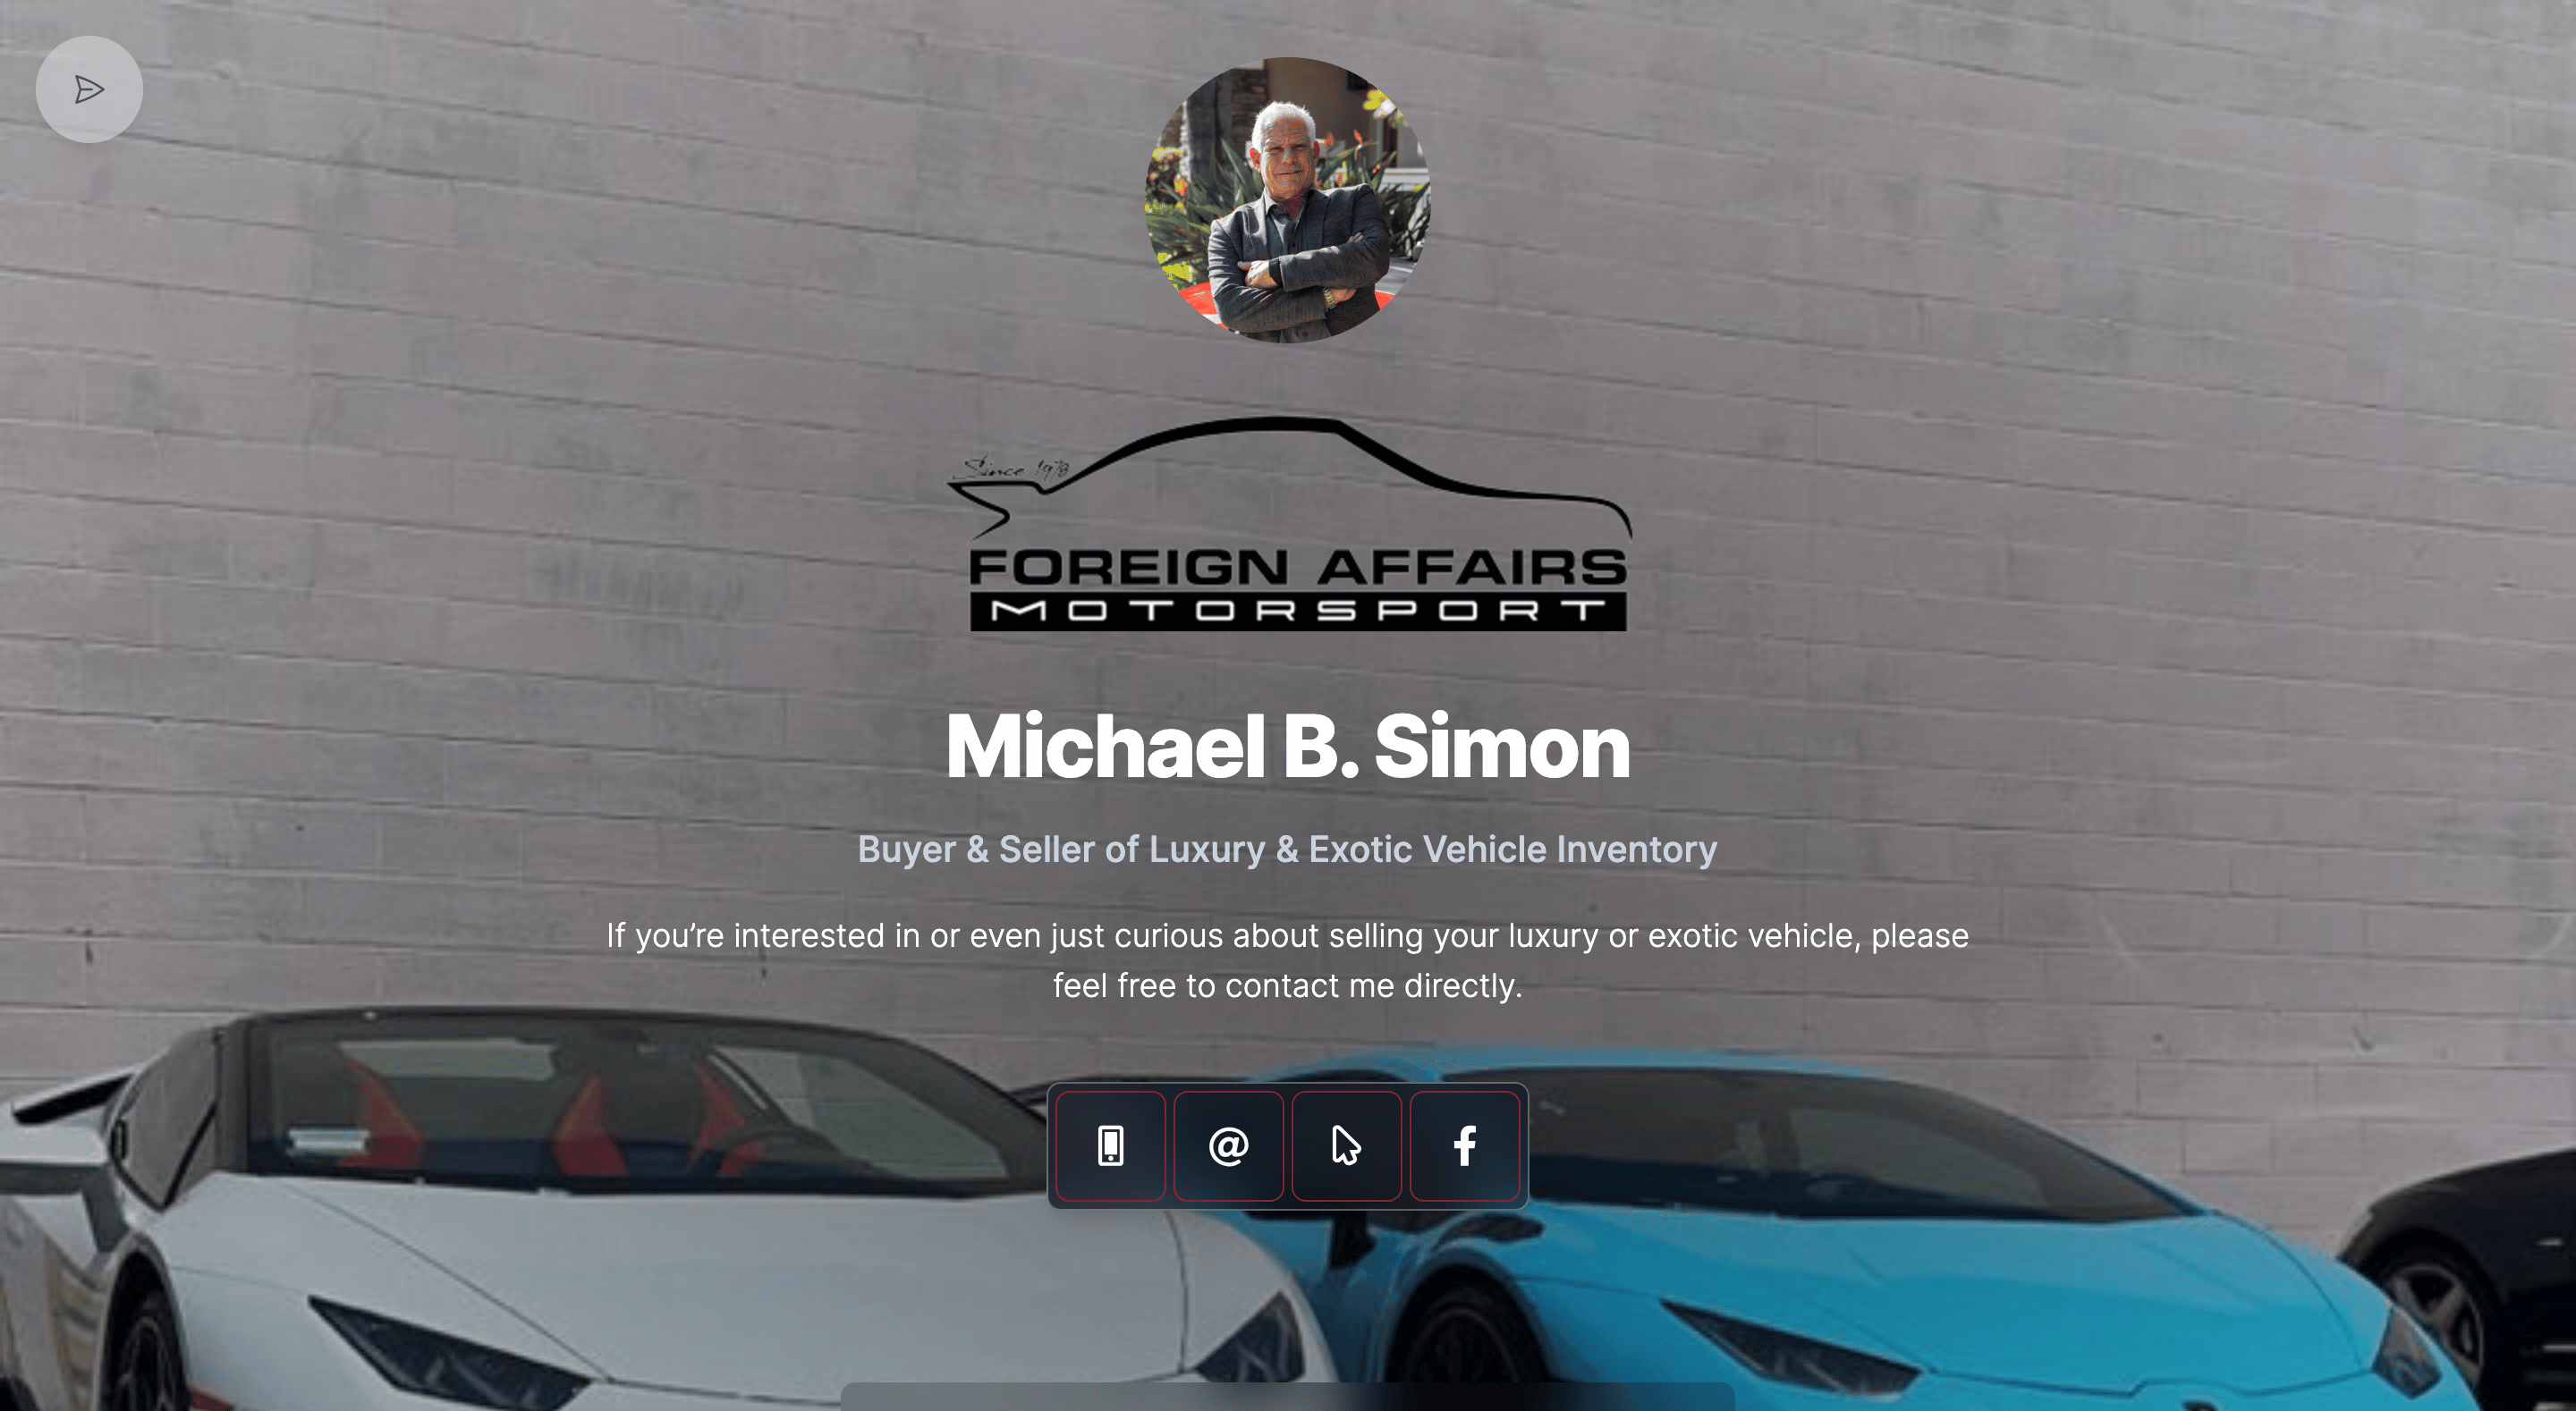 Digital business card for Michael Simon at Foreign Affairs Motorsports